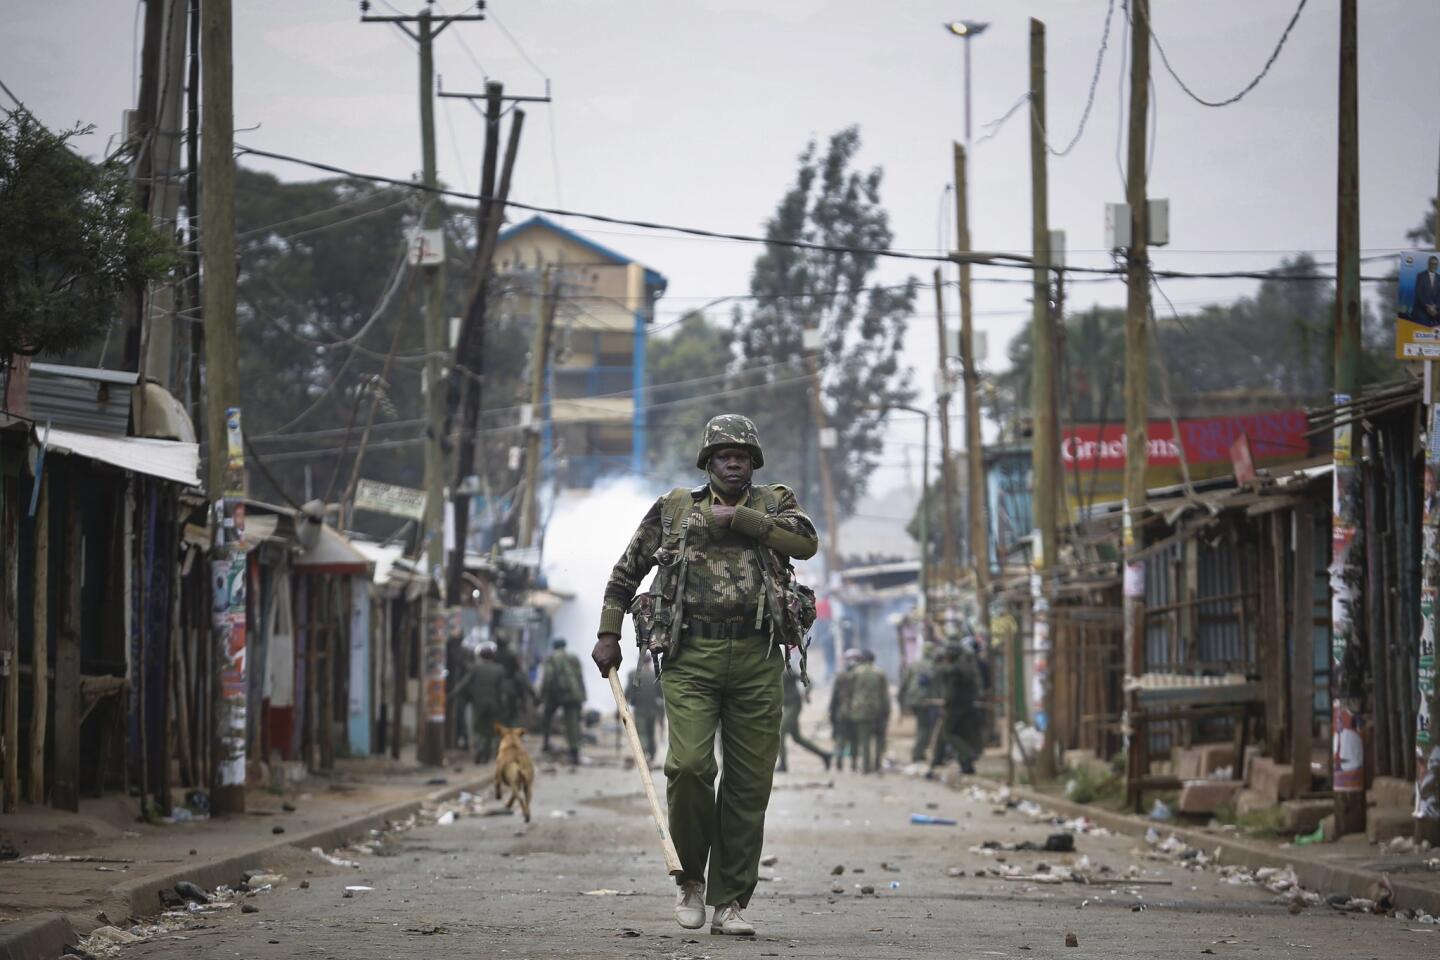 Protests rage in Nairobi after election results